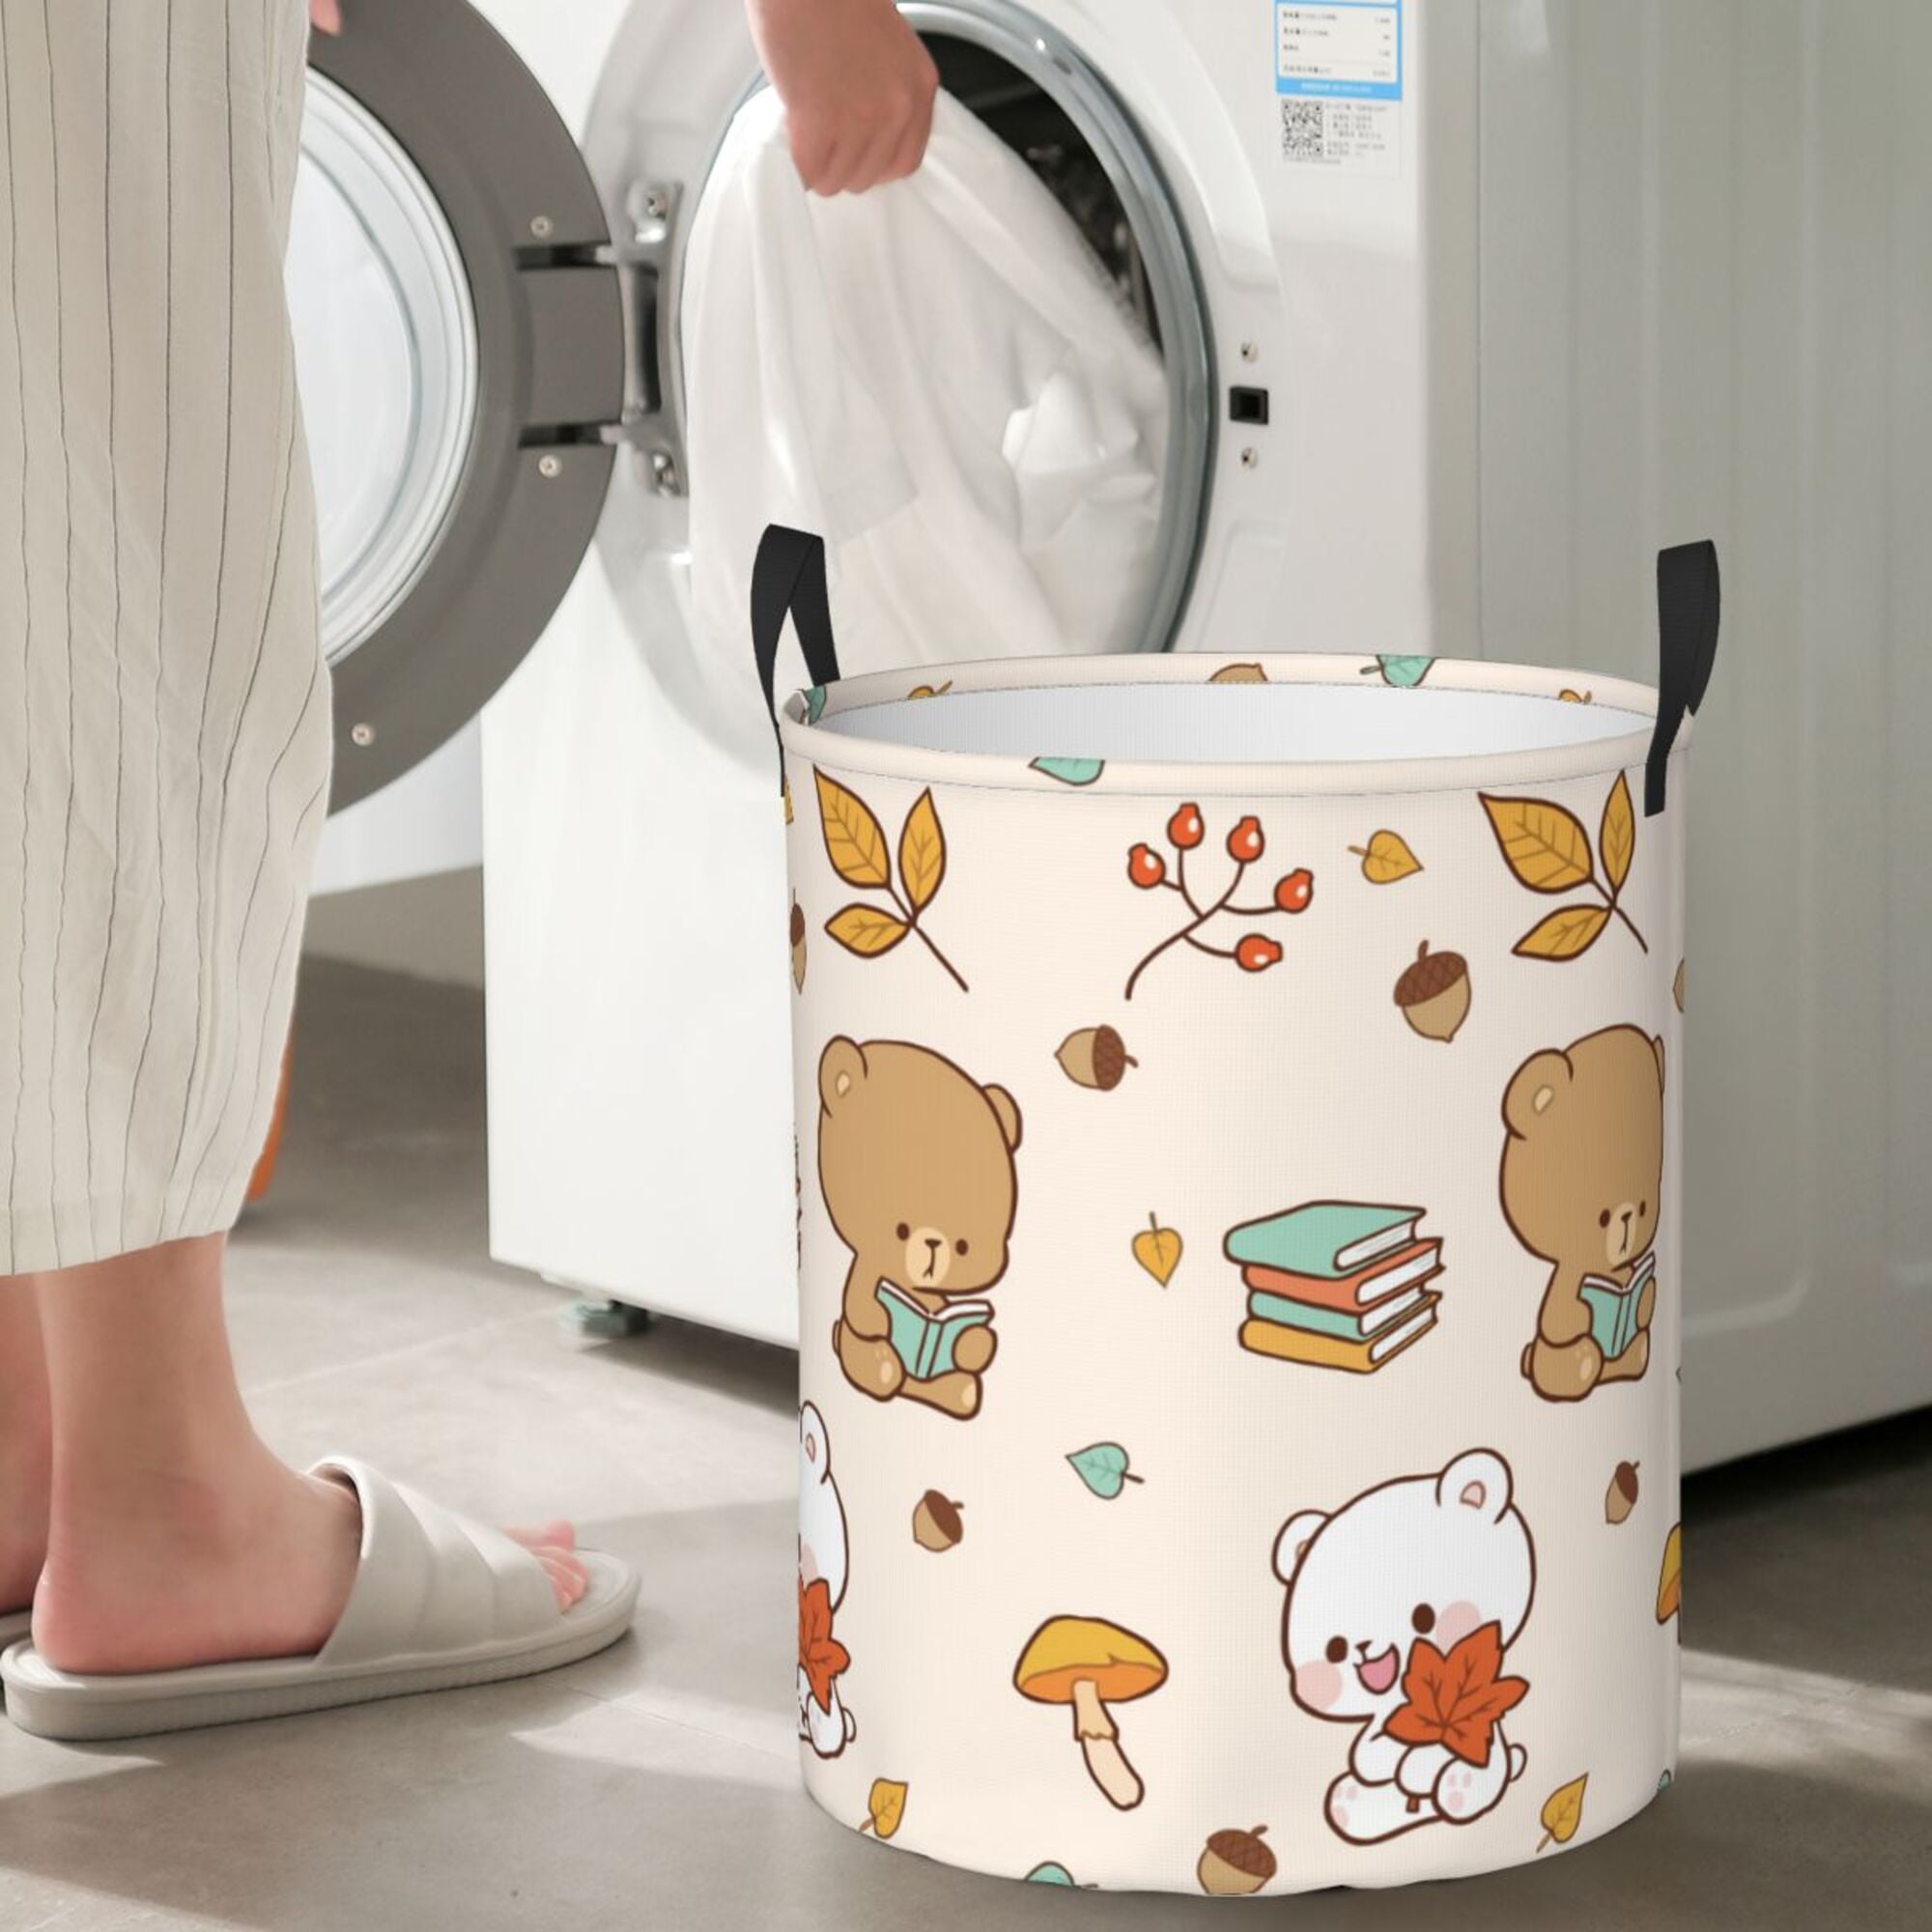 Large Round Storage Basket, Cute Collapsible Laundry Basket Organizers and  Storage Bins Foldable Dirty Clothes Basket Waterproof Nursery Hamper Canvas  Fabric - China Laundry Bag, Toy Storage Bag